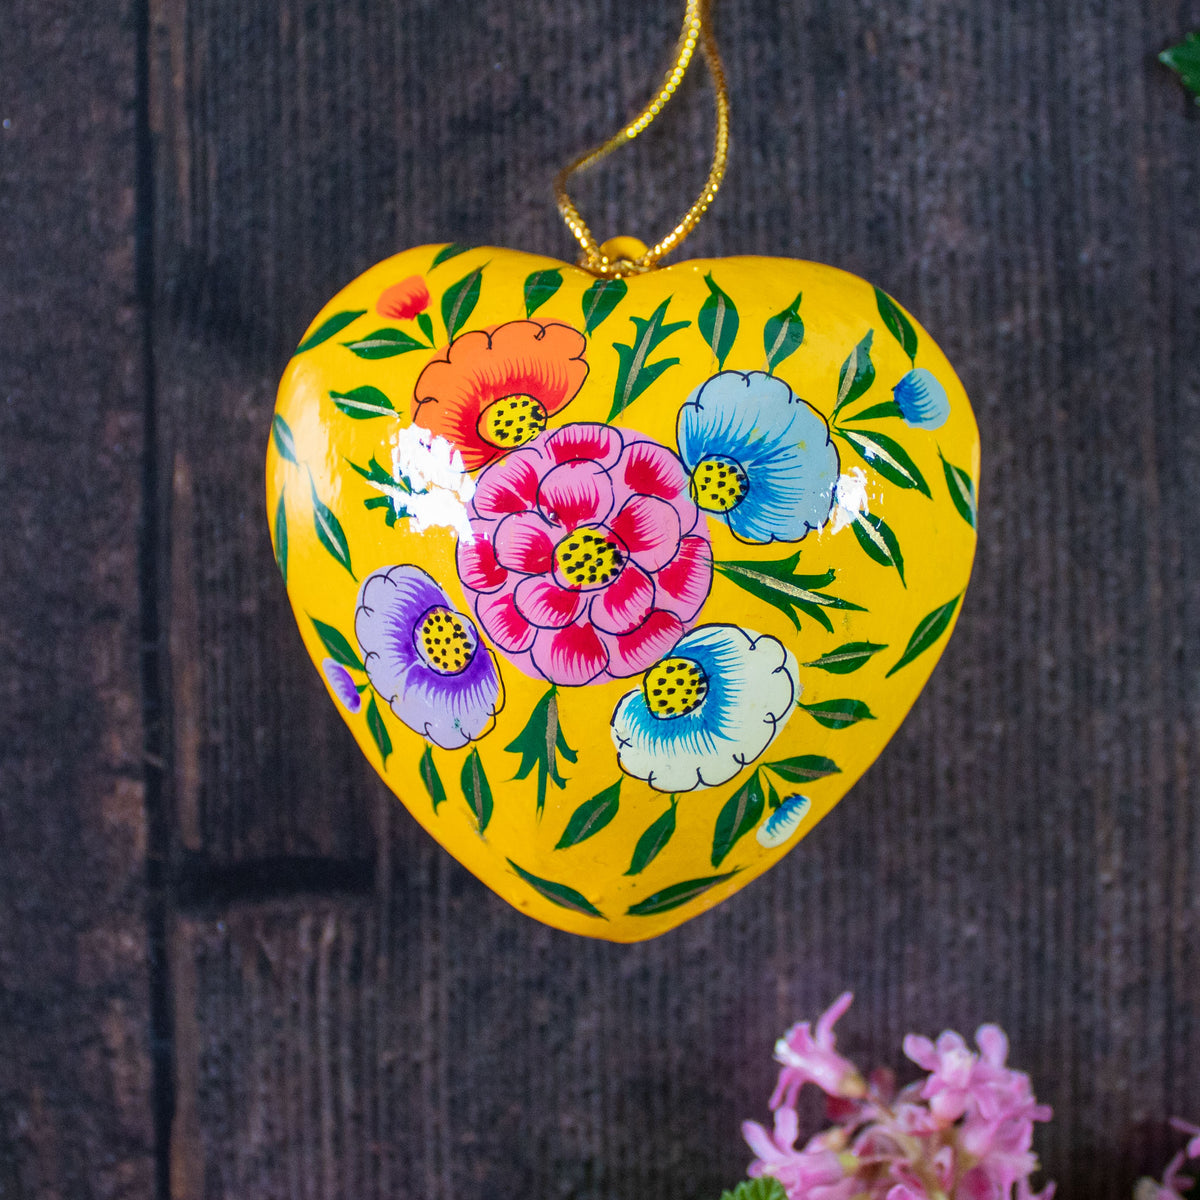 Hanging Spring Decoration - Painted Heart - Yellow Flowers